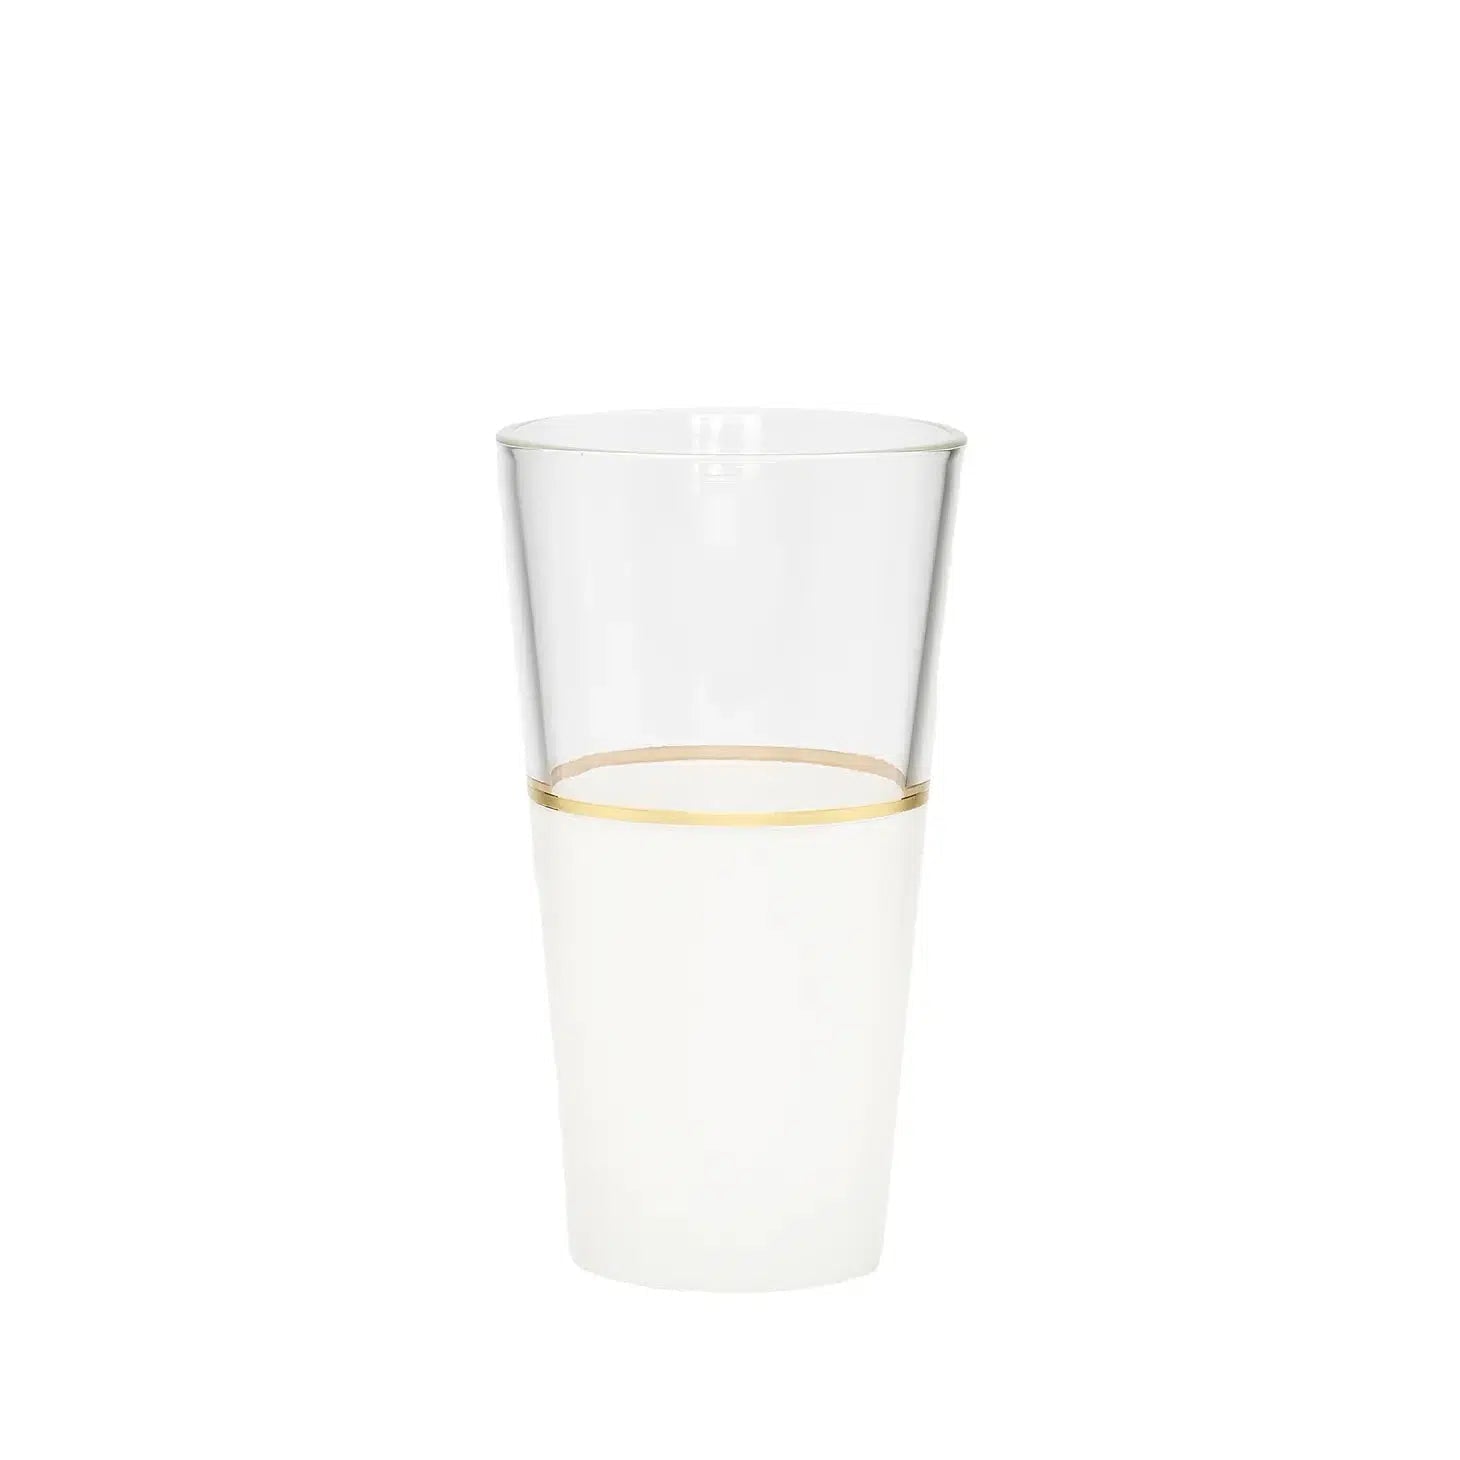 Set of 6 Tumblers White/Clear with Gold Trim Tumblers High Class Touch - Home Decor 